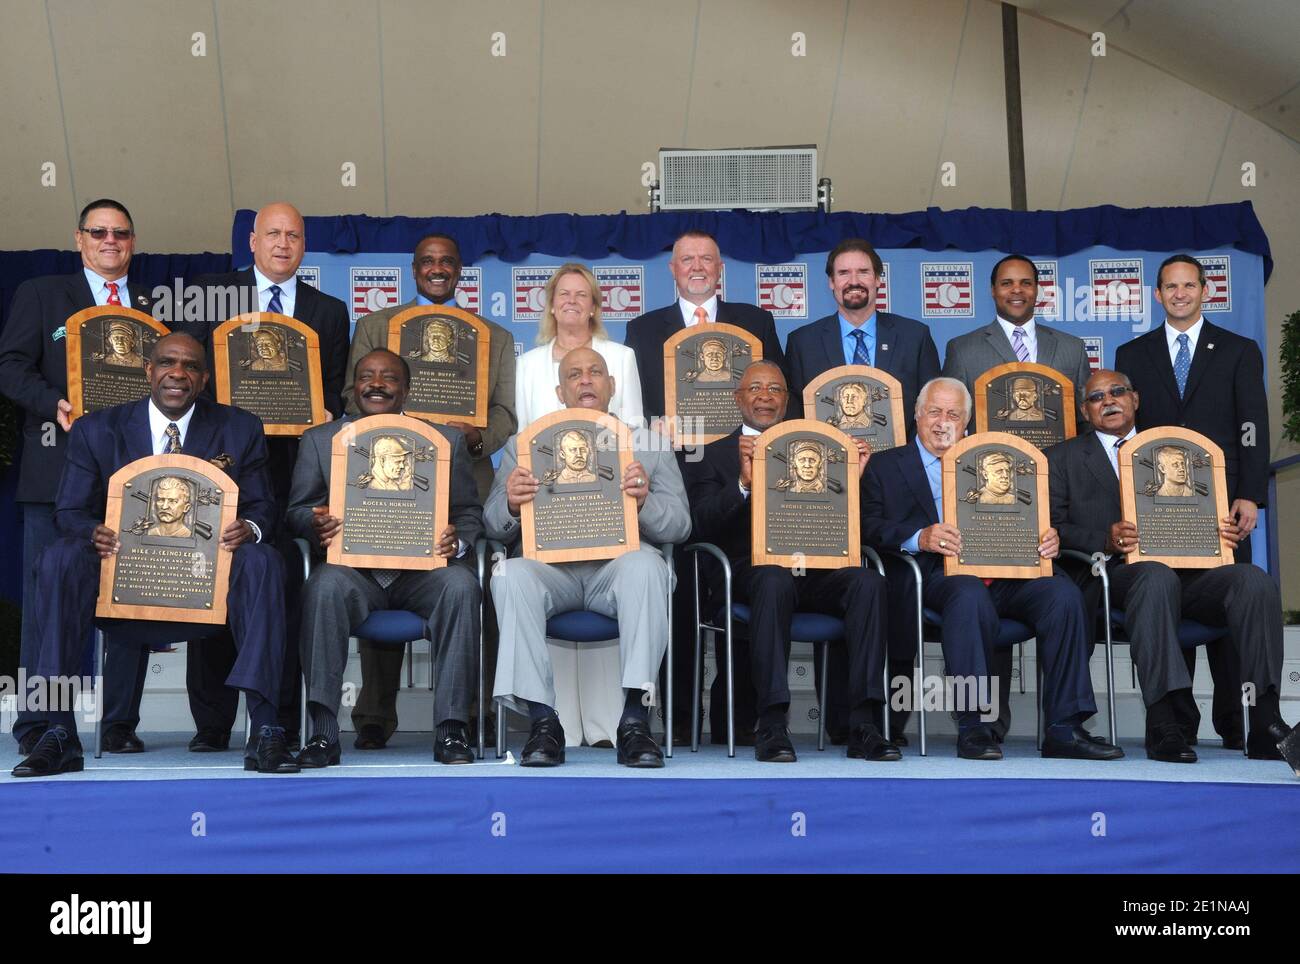 **FILE PHOTO** Tommy LaSorda Has Passed Away. New York, NY-July 28: Hall of Fame members (L-R) Andre Dawson, Joe Morgan, Orlando Cepeda, Ozzie Smith, Tommy LaSorda, Billy Williams, (top Row) Carlton Fisk, Cal Ripken, Jim rice, Jane Clark, Bert Blyleven, Wade Boggs, Barry Larkin and Jeff Idelson attend the National Baseball Hall of Fame induction ceremony on July 28, 2013 in Cooperstown, New York. Credit: George Napolitano/MediaPunch Stock Photo